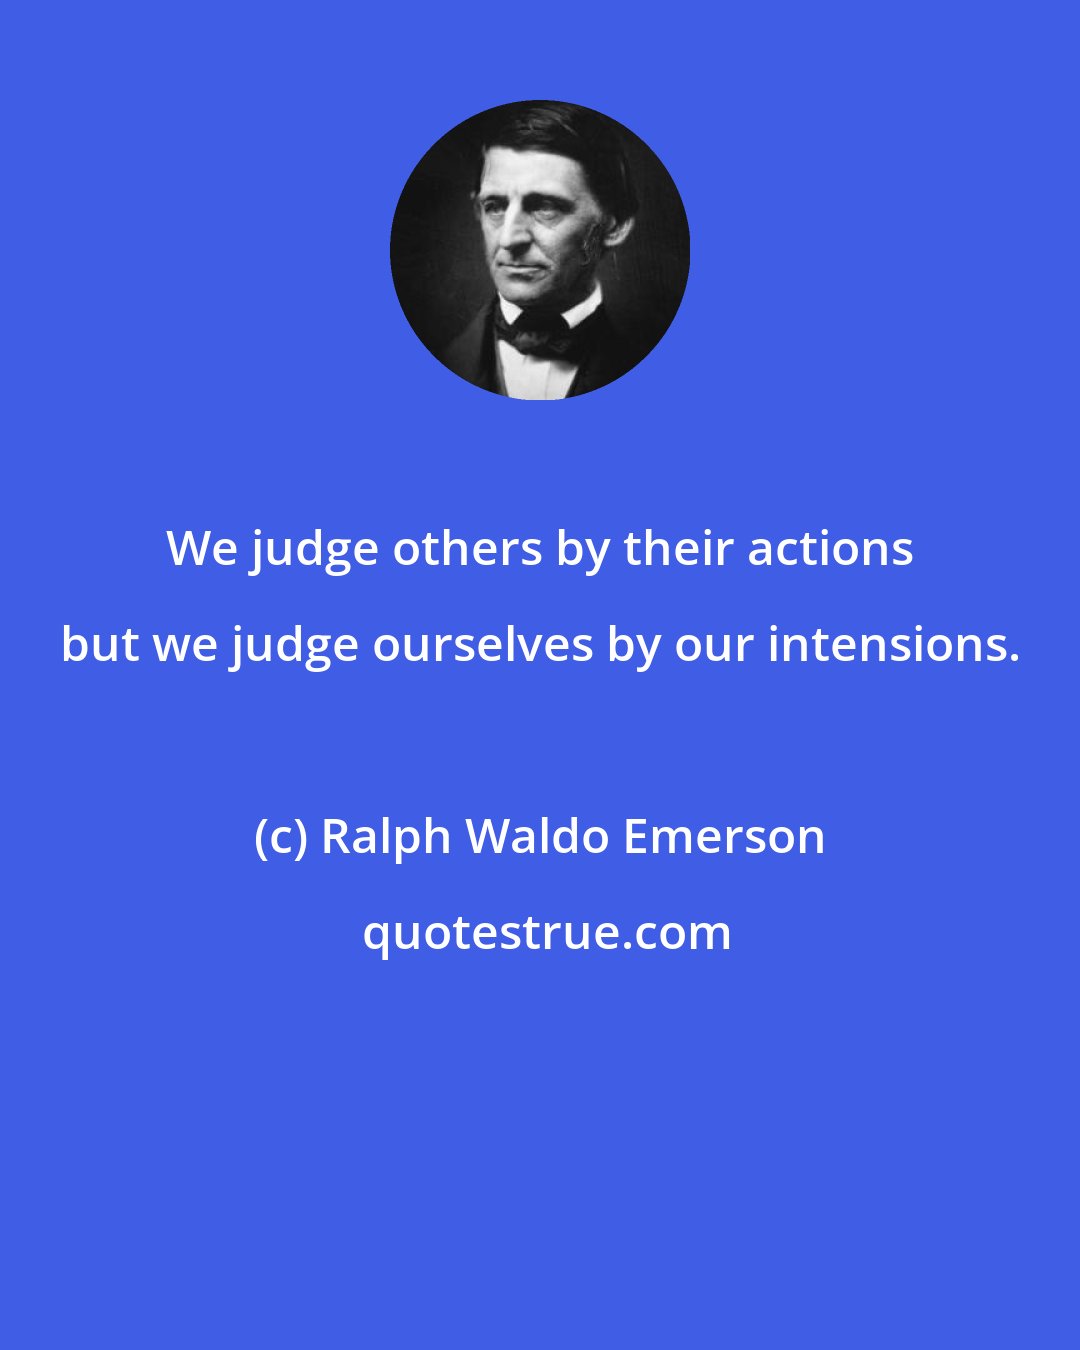 Ralph Waldo Emerson: We judge others by their actions but we judge ourselves by our intensions.